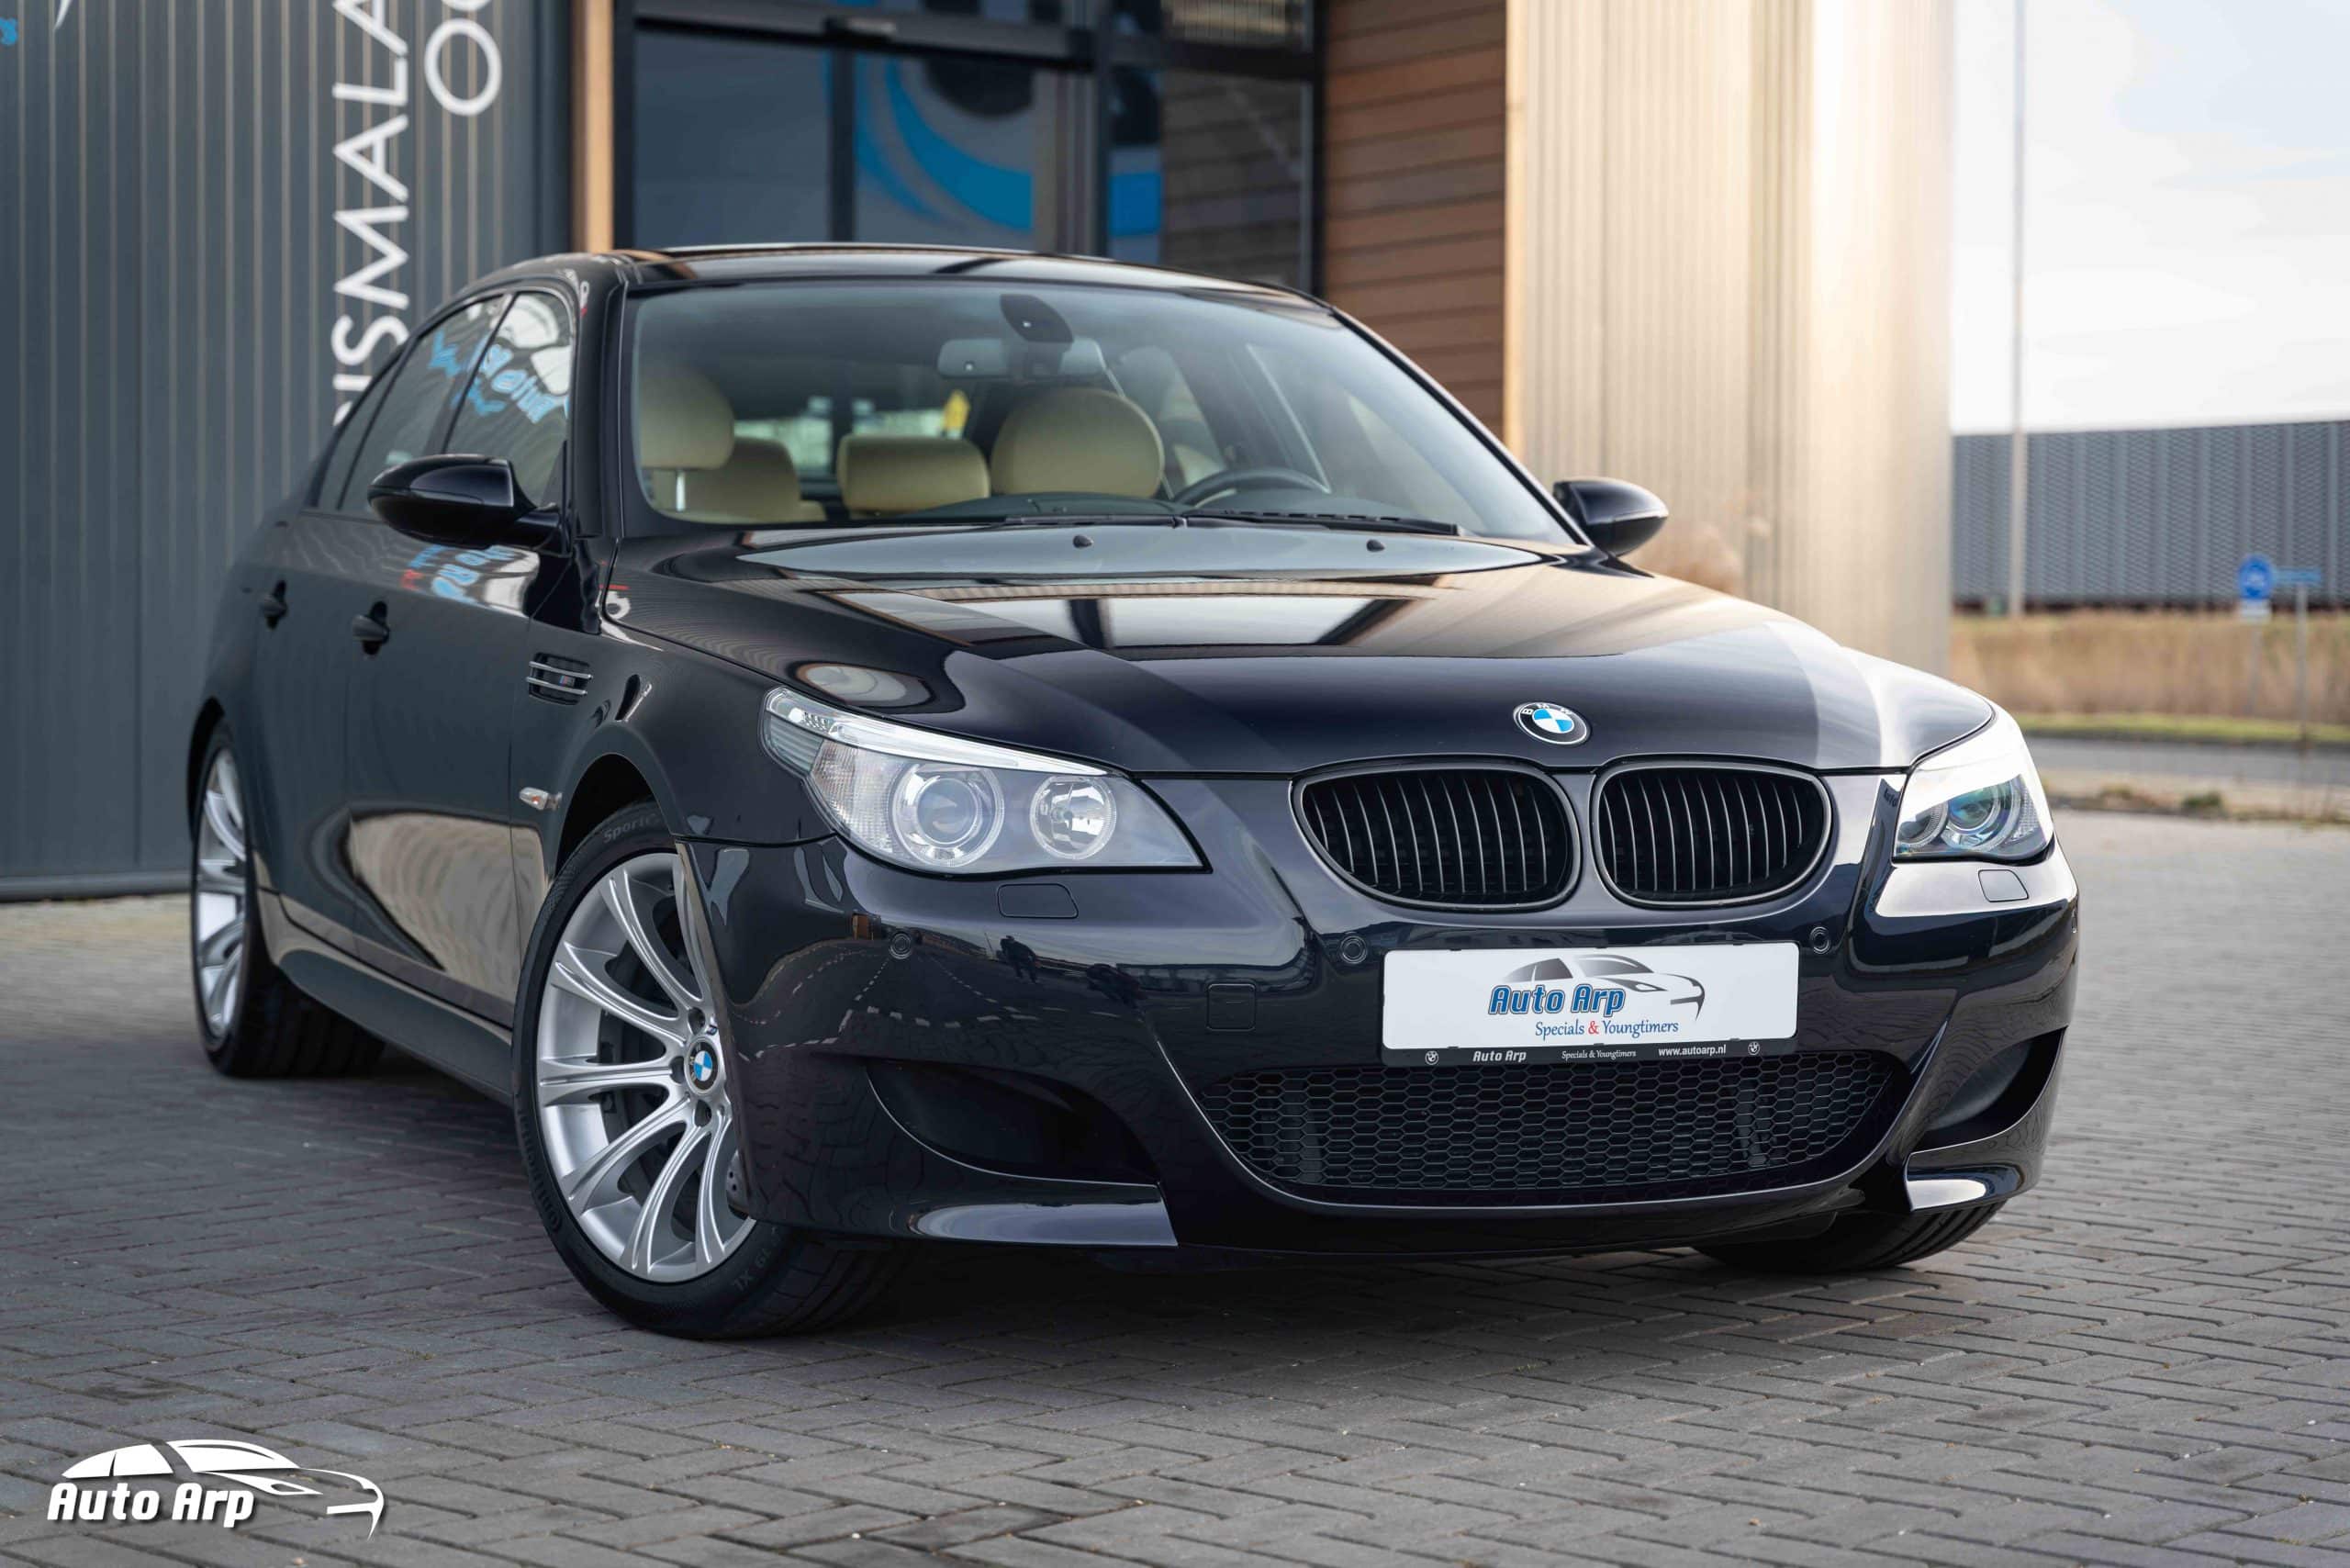 BMW E60 M5 V10 Individual 507hp in perfect condition